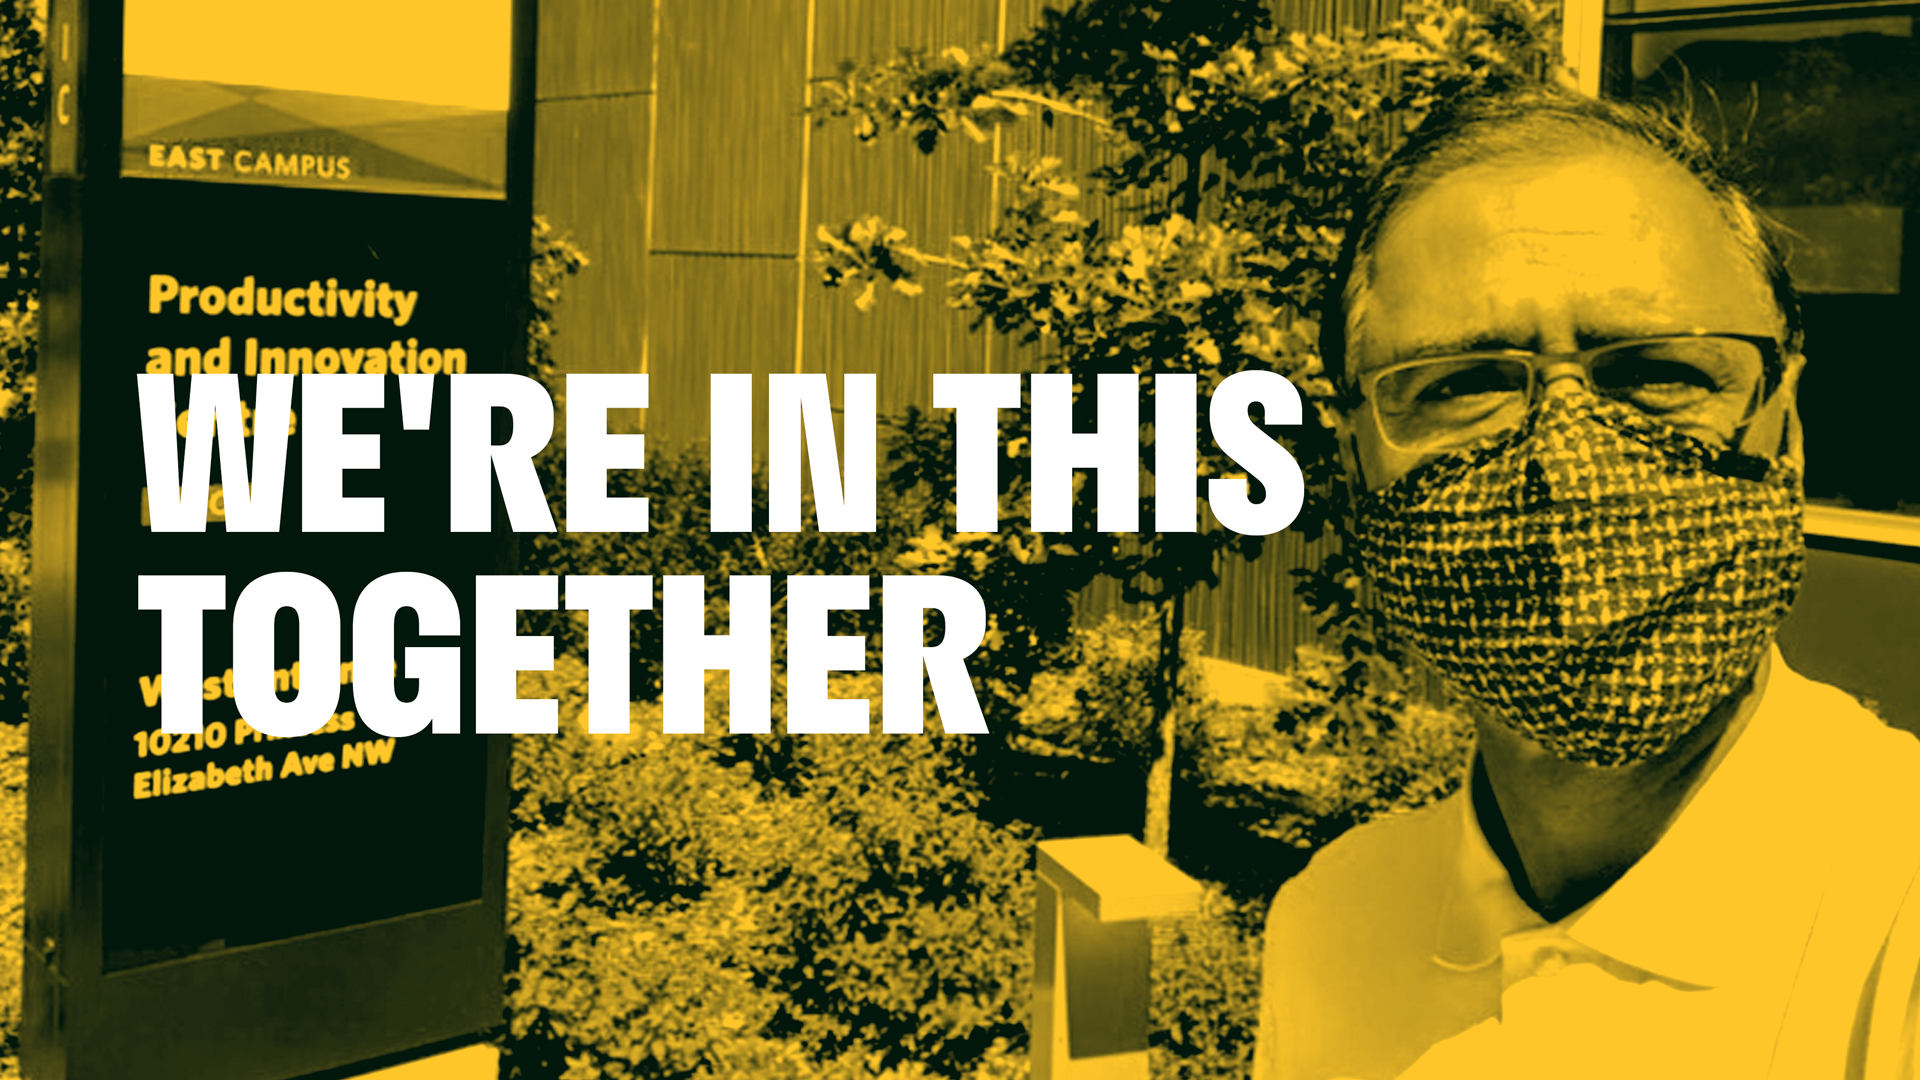 An image of Amarjeet Sohi wearing a face mask. The text overlay reads: "We're in this together"